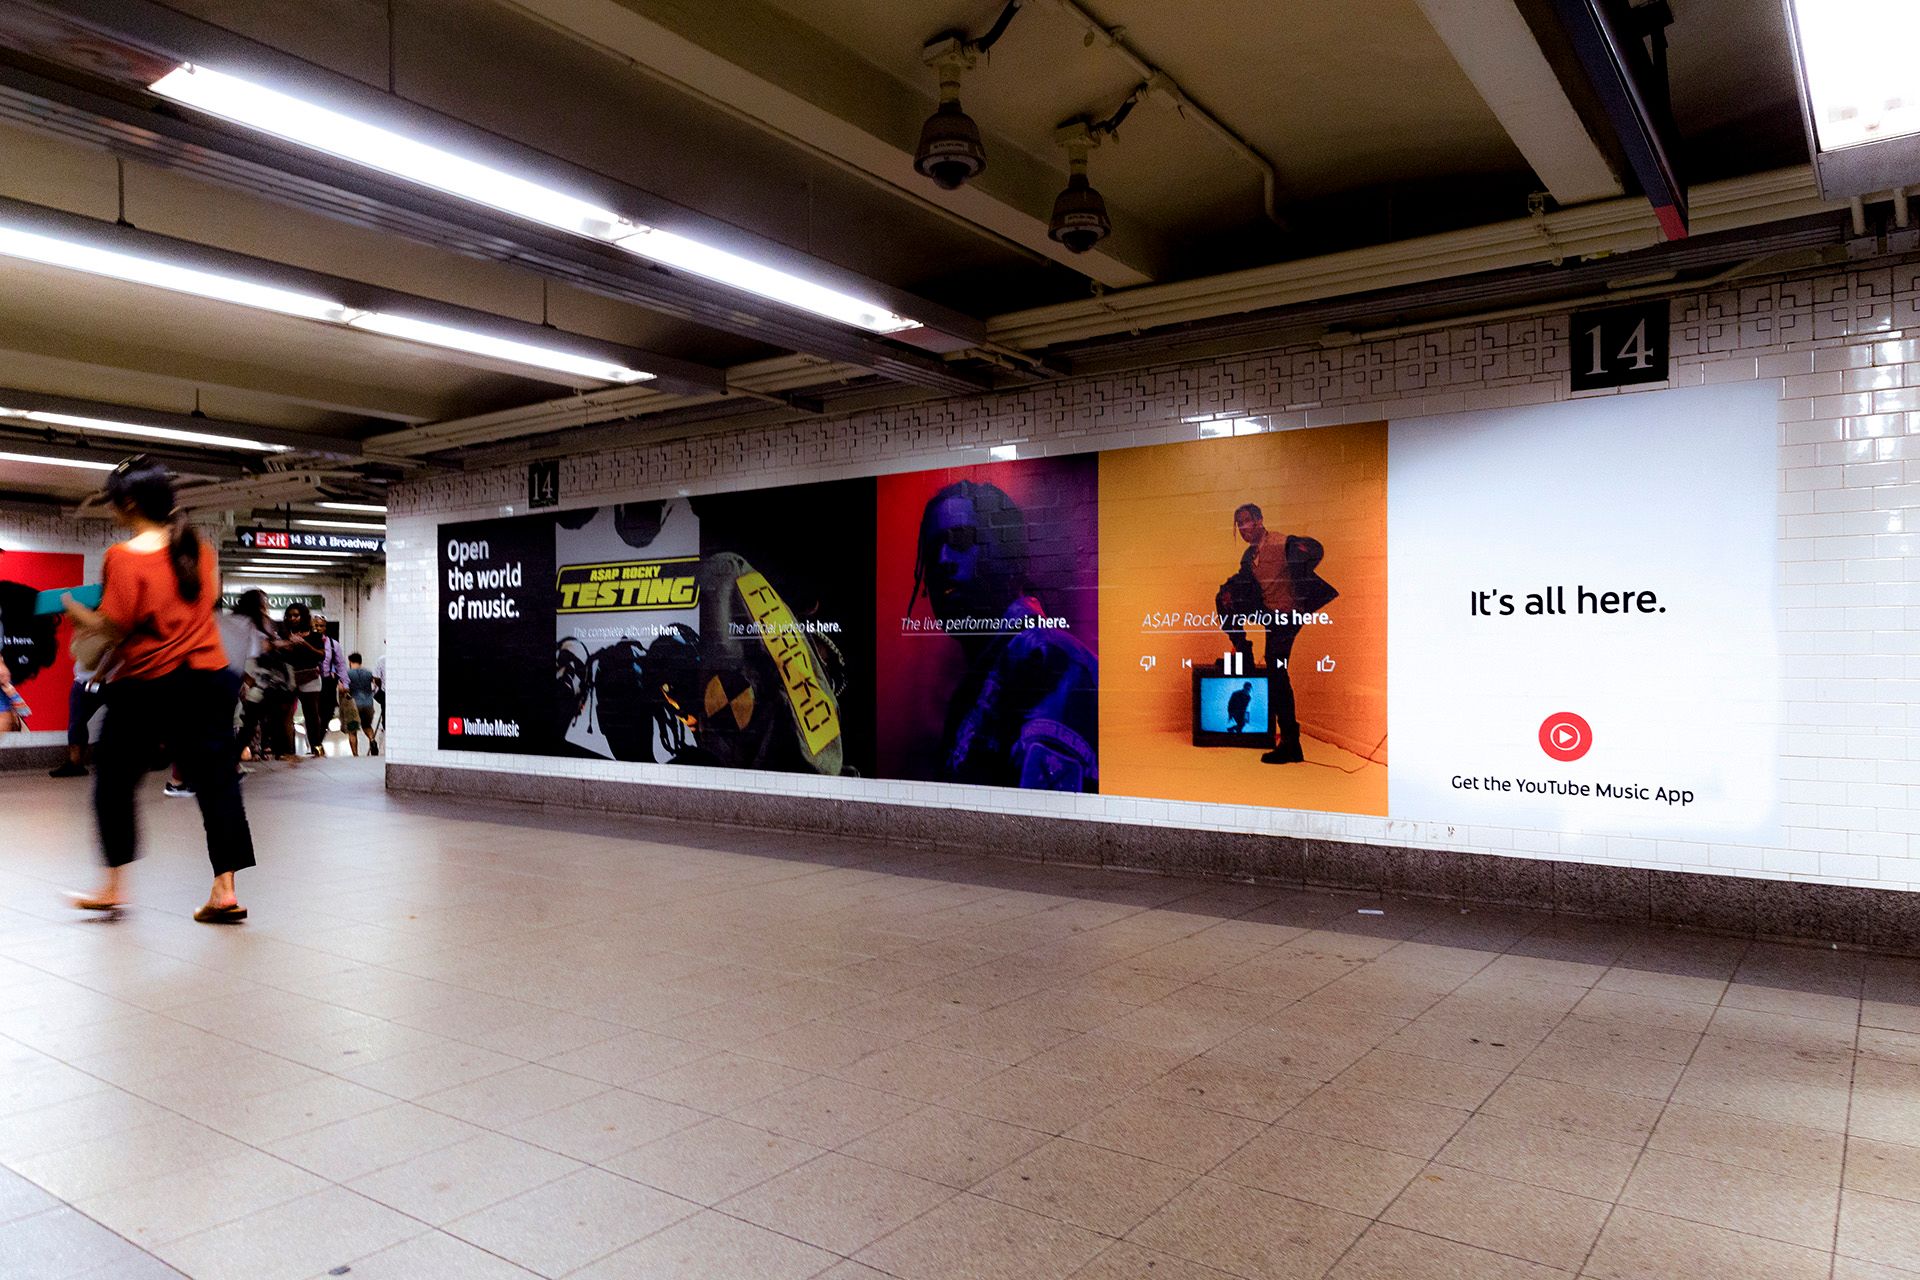 YouTube Ads up in Union Square station. Open the world of music. Its all here. Get the YouTube Music App